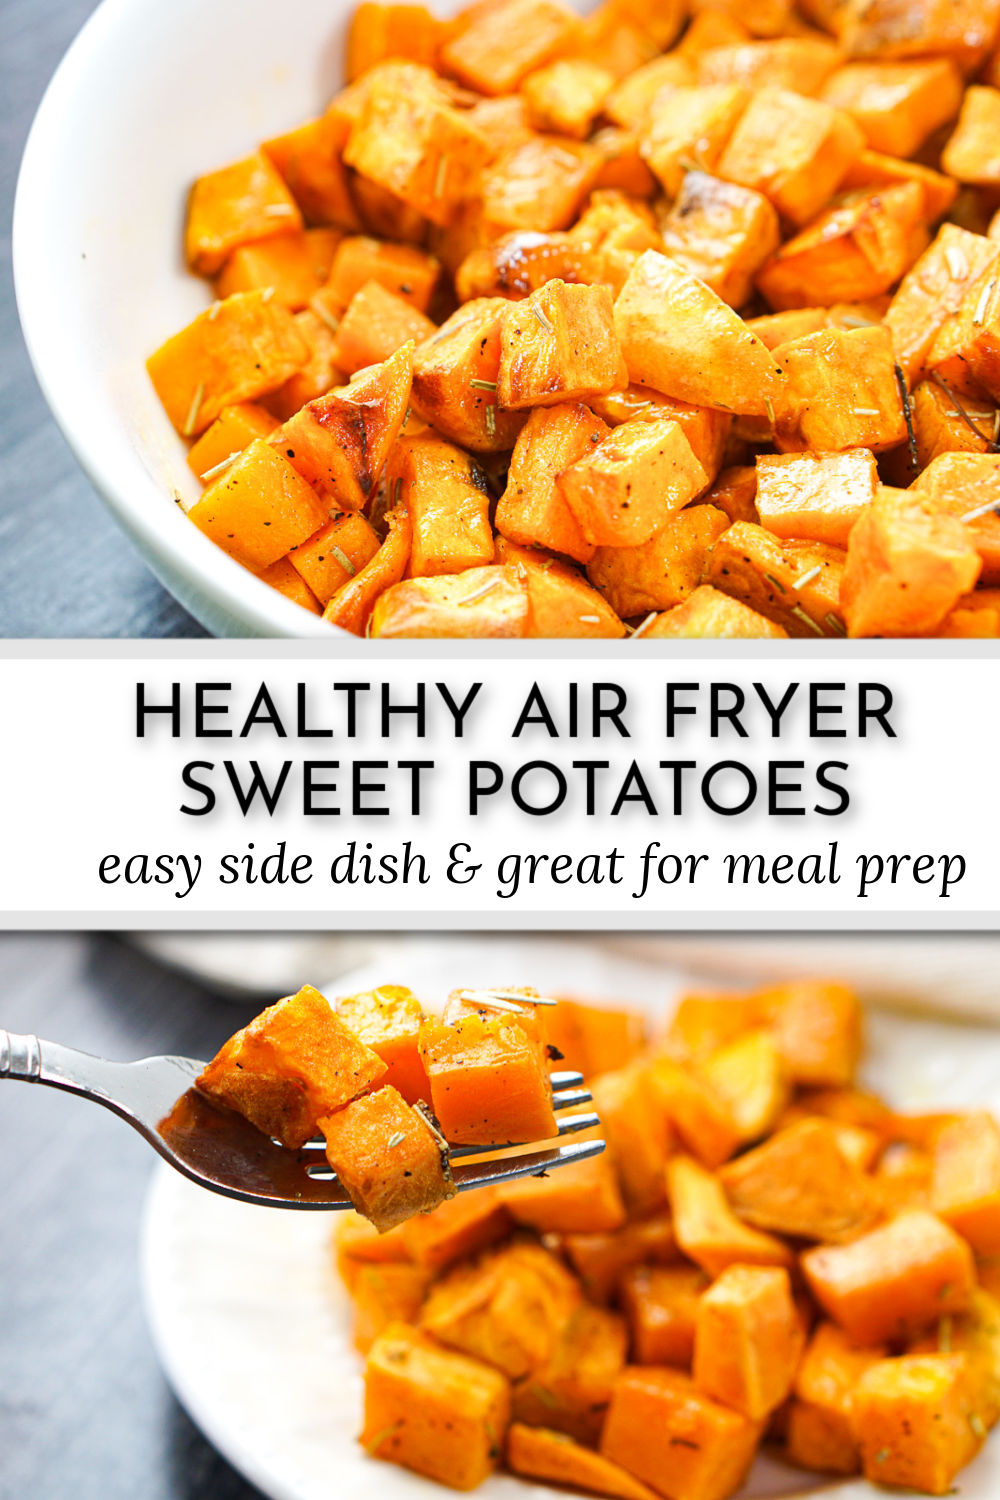 white bowl and forkful of roasted sweet potatoes and text